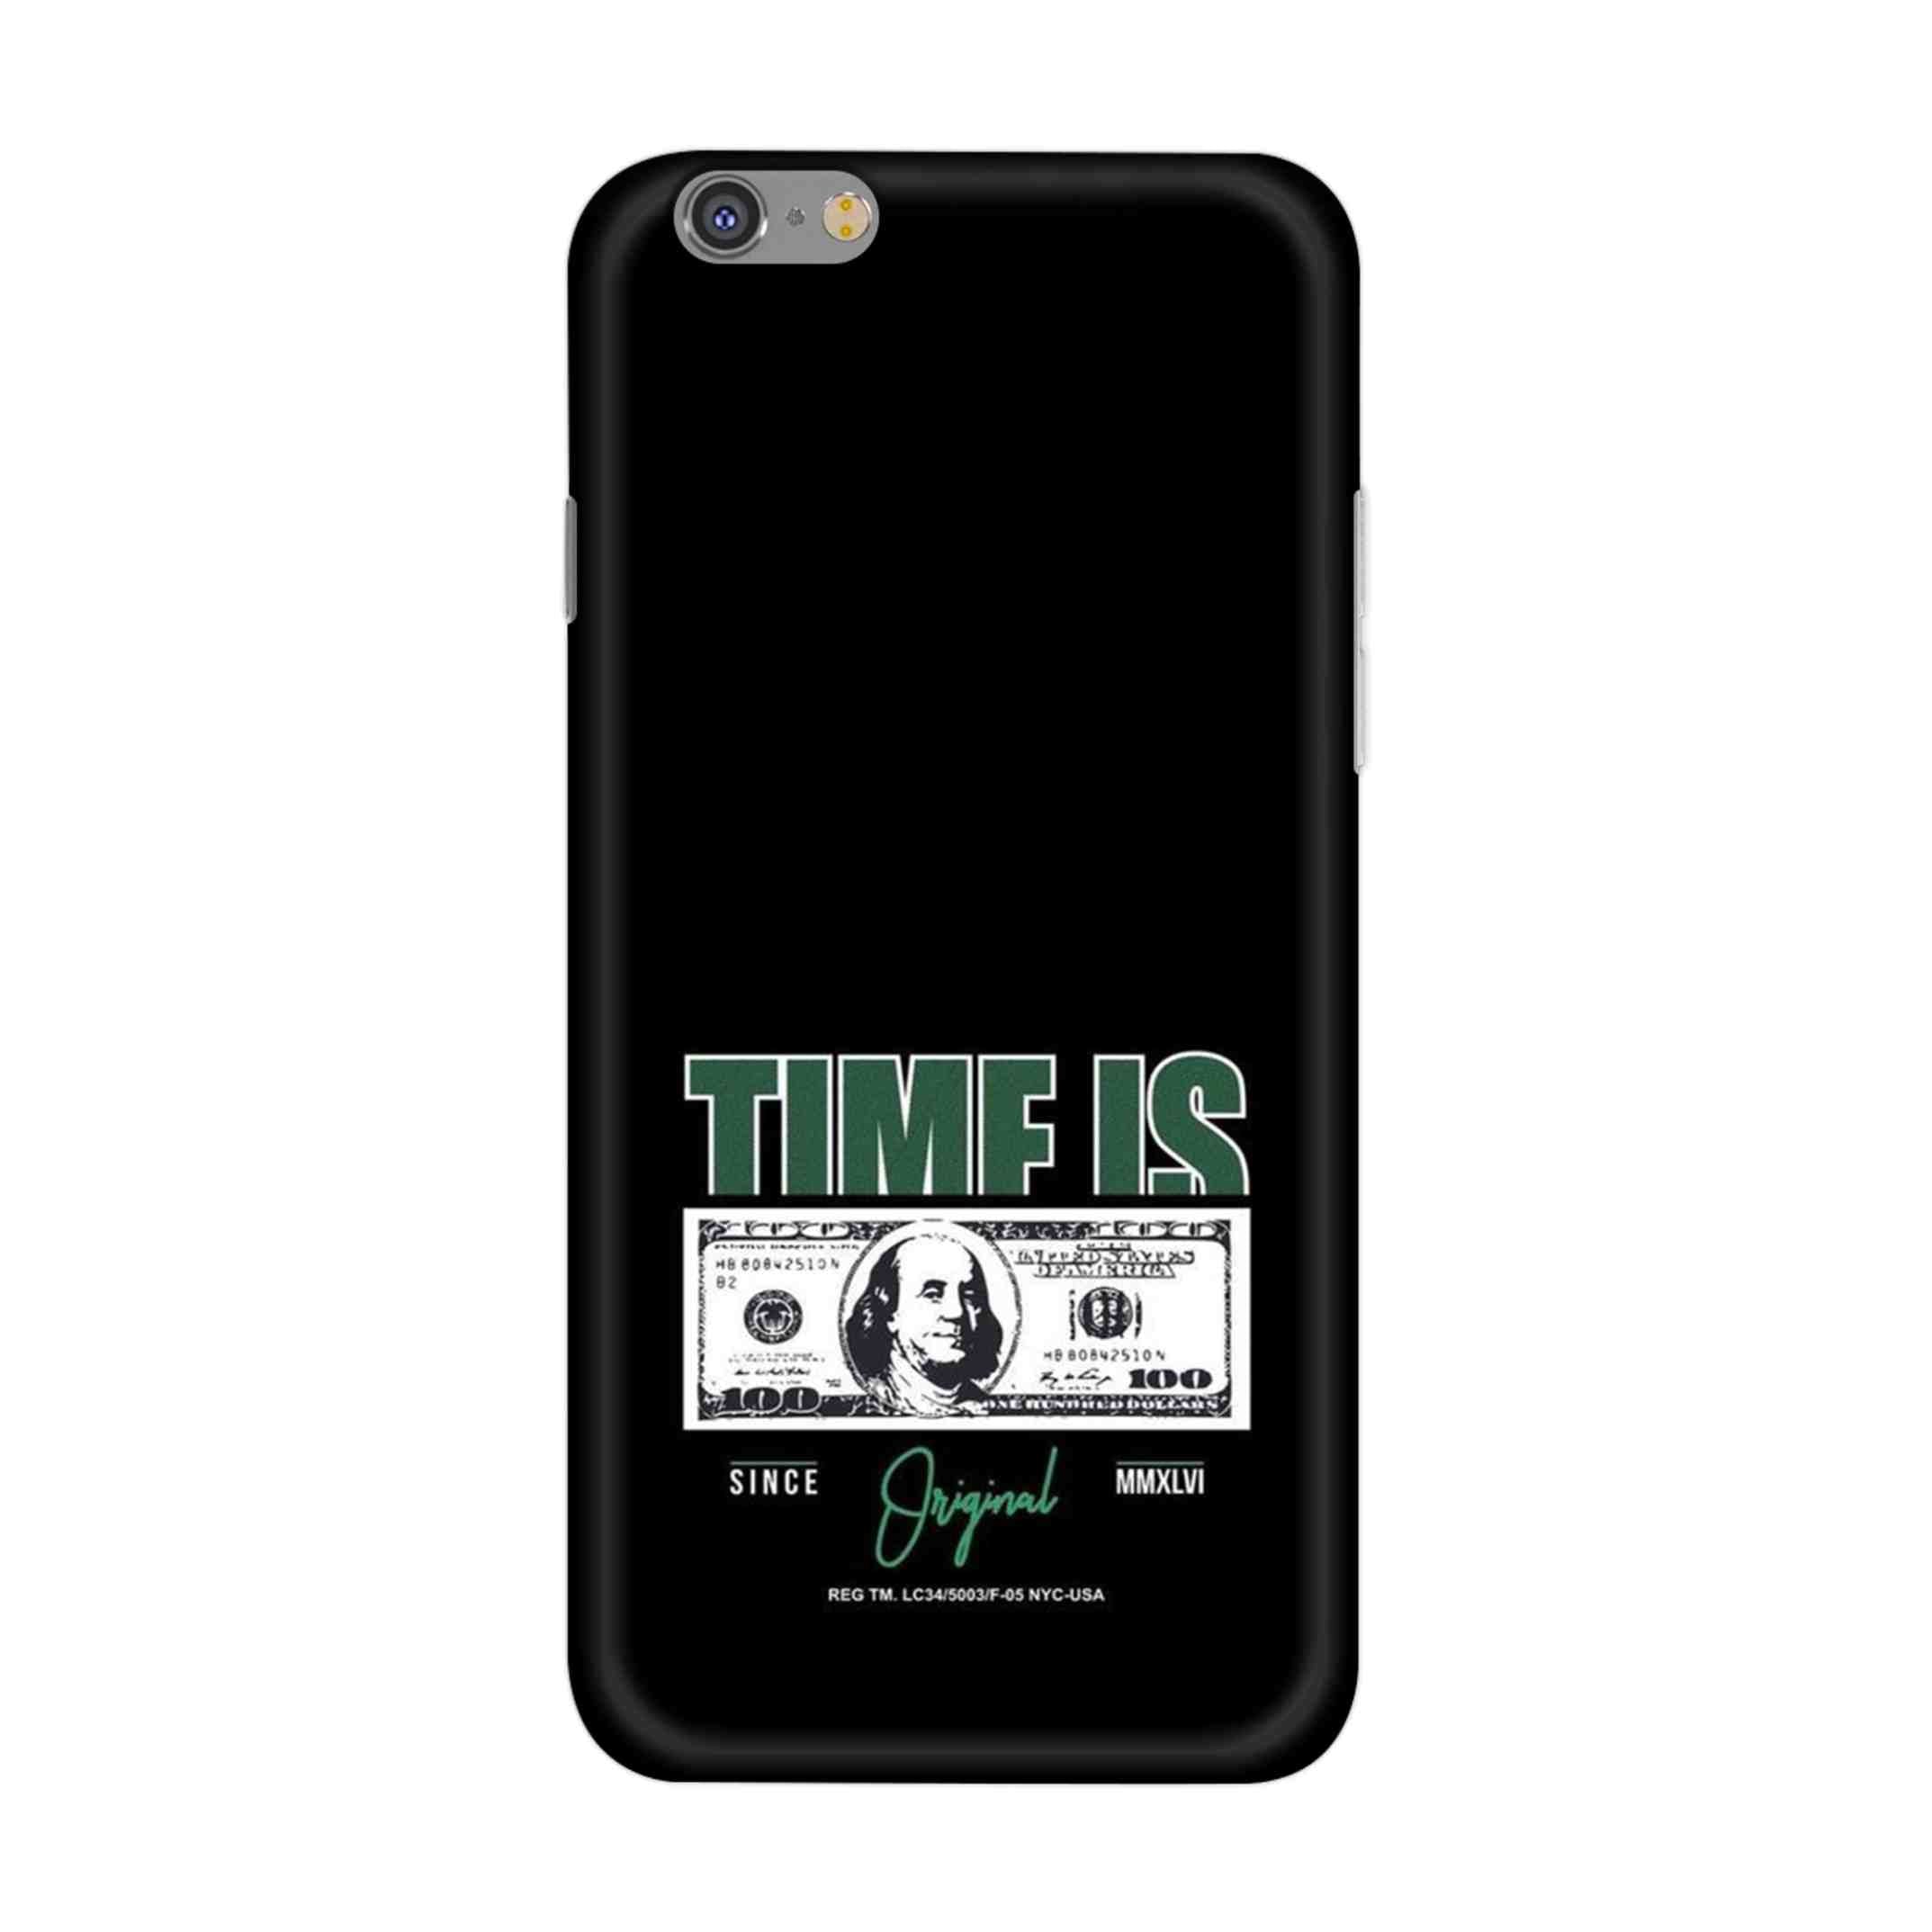 Buy Time Is Money Hard Back Mobile Phone Case/Cover For iPhone 6 / 6s Online